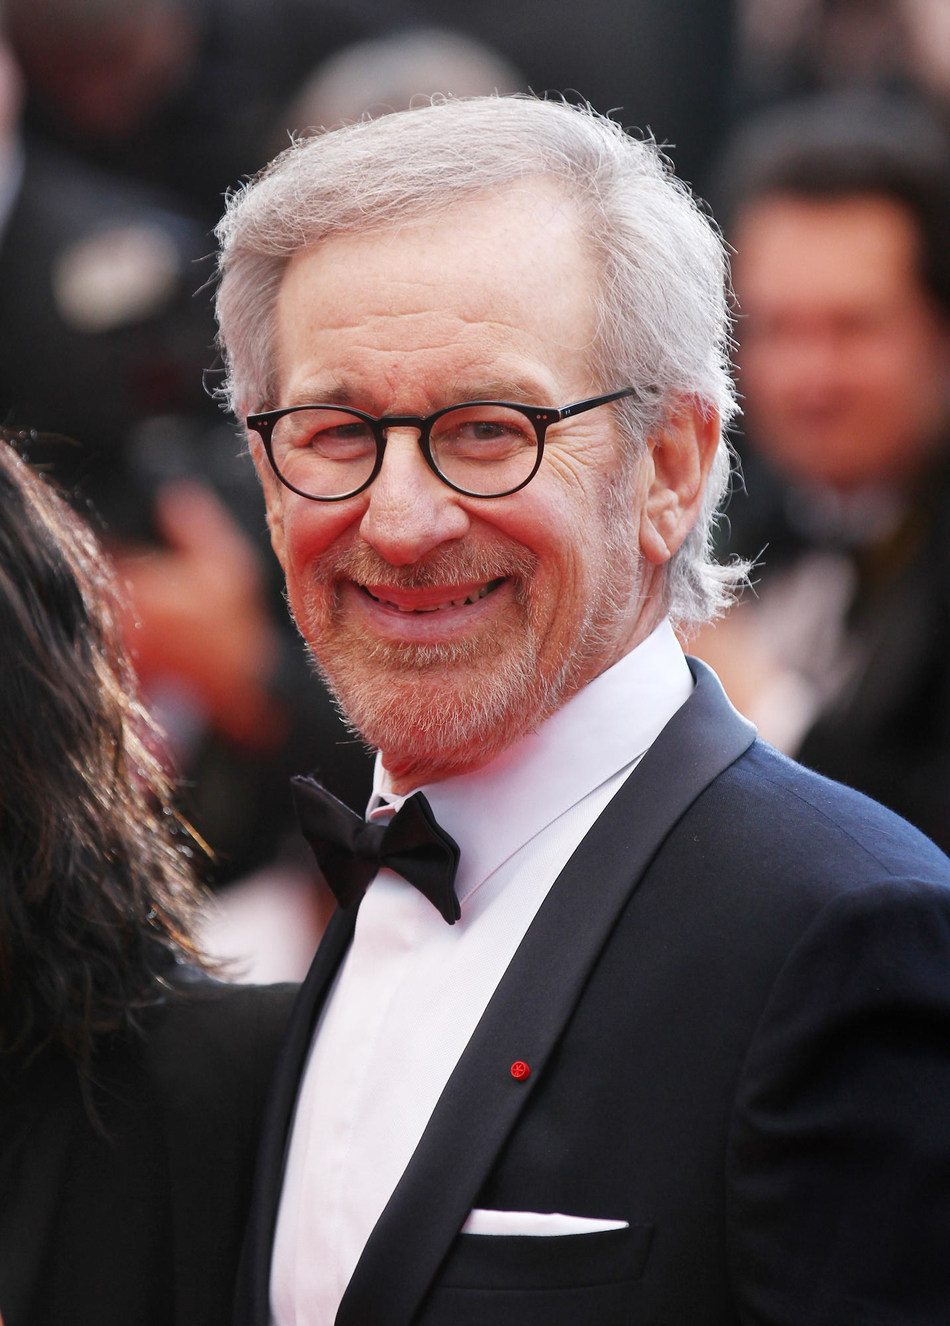 Director, Producer and Philanthropist Steven Spielberg Announced as the